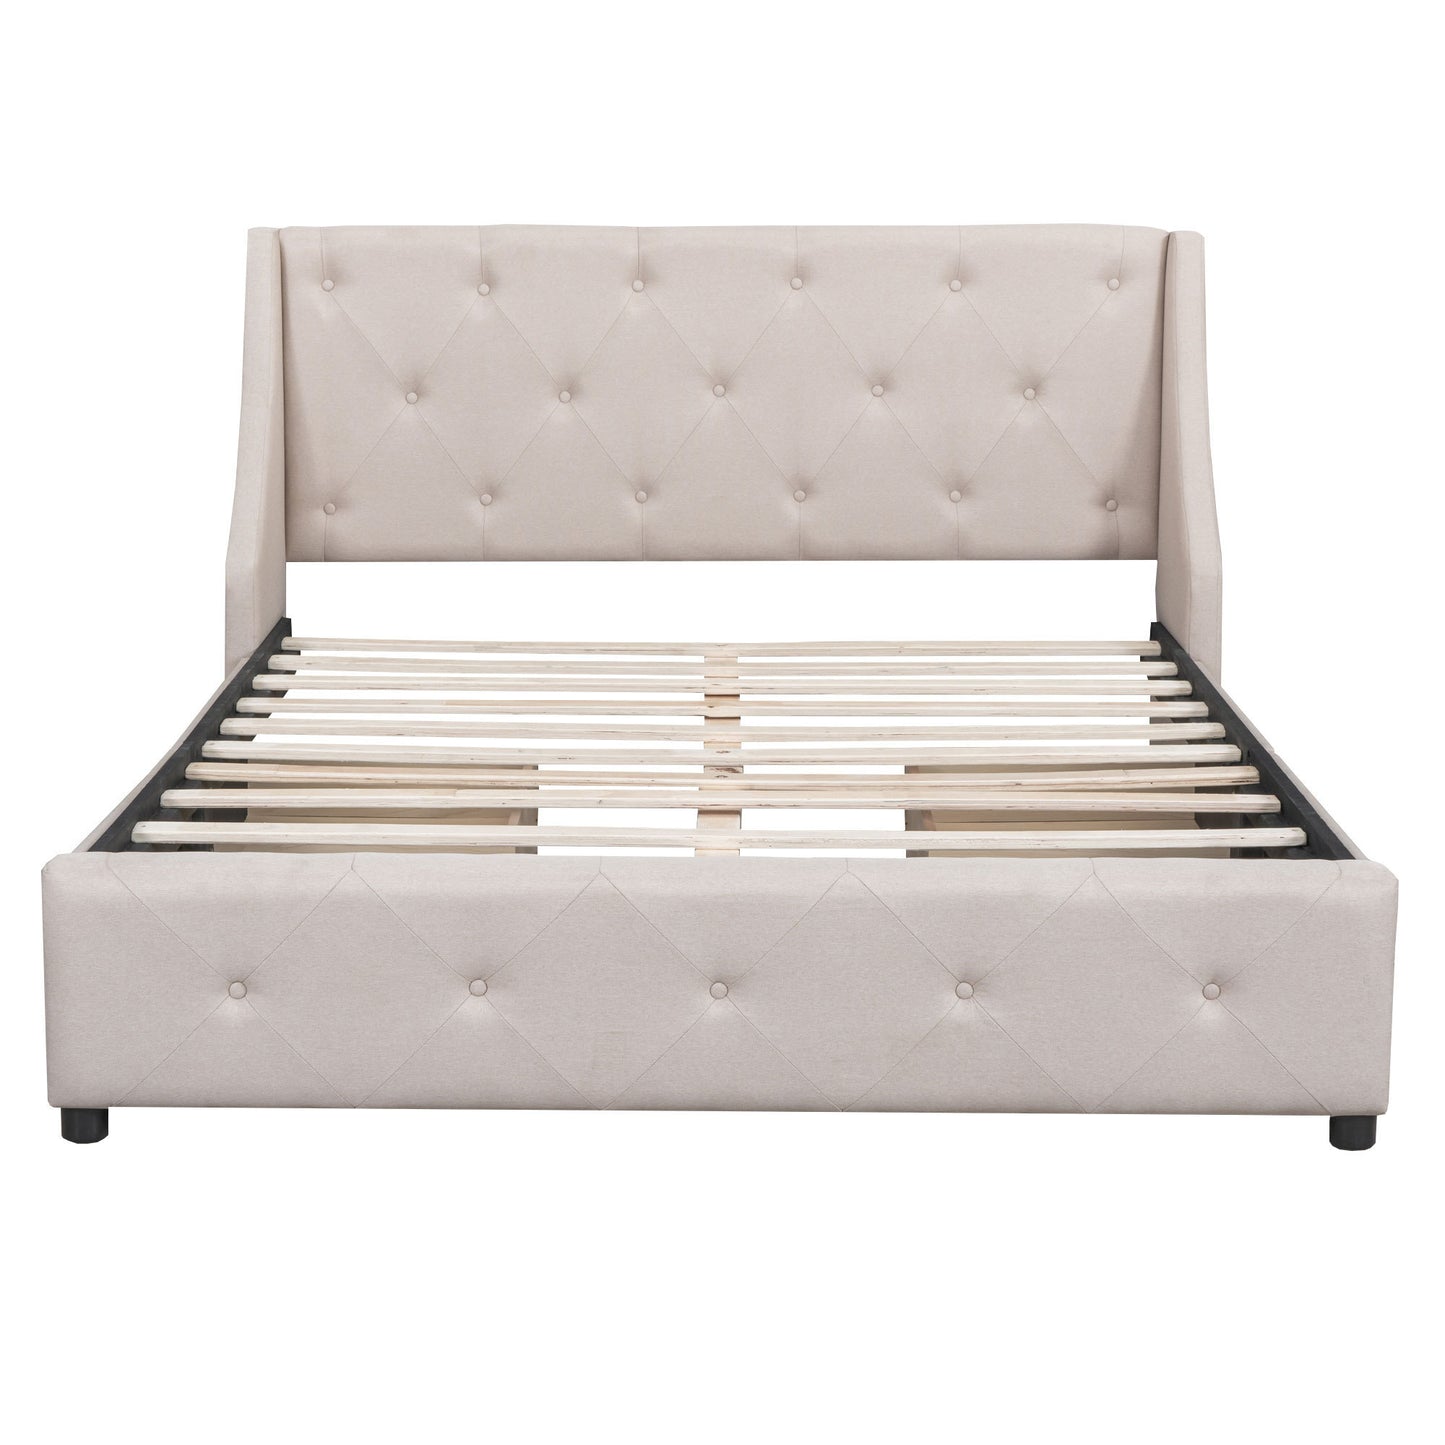 Upholstered Platform Bed with Wingback Tufted Headboard and 4 Drawers, No Box Spring Needed, Linen Fabric, Queen Size Beige